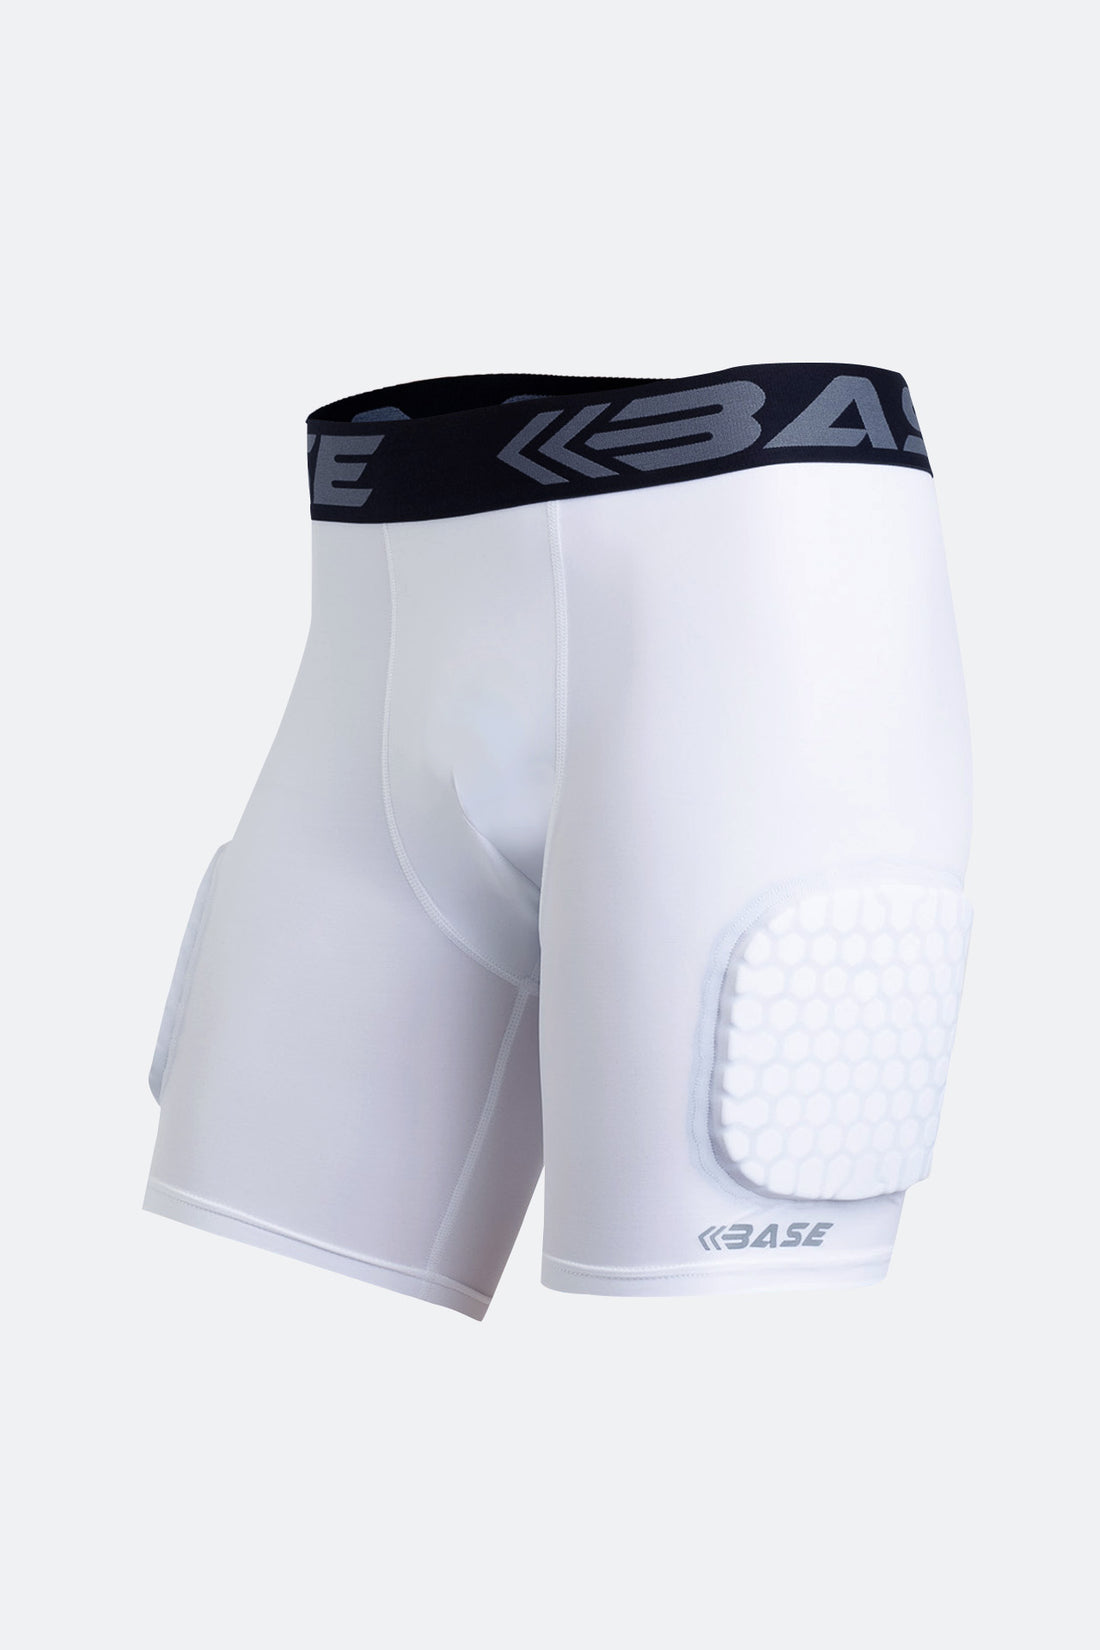 Men's Nike Padded Compression Shorts  Padded compression shorts, Compression  shorts, White nike shorts